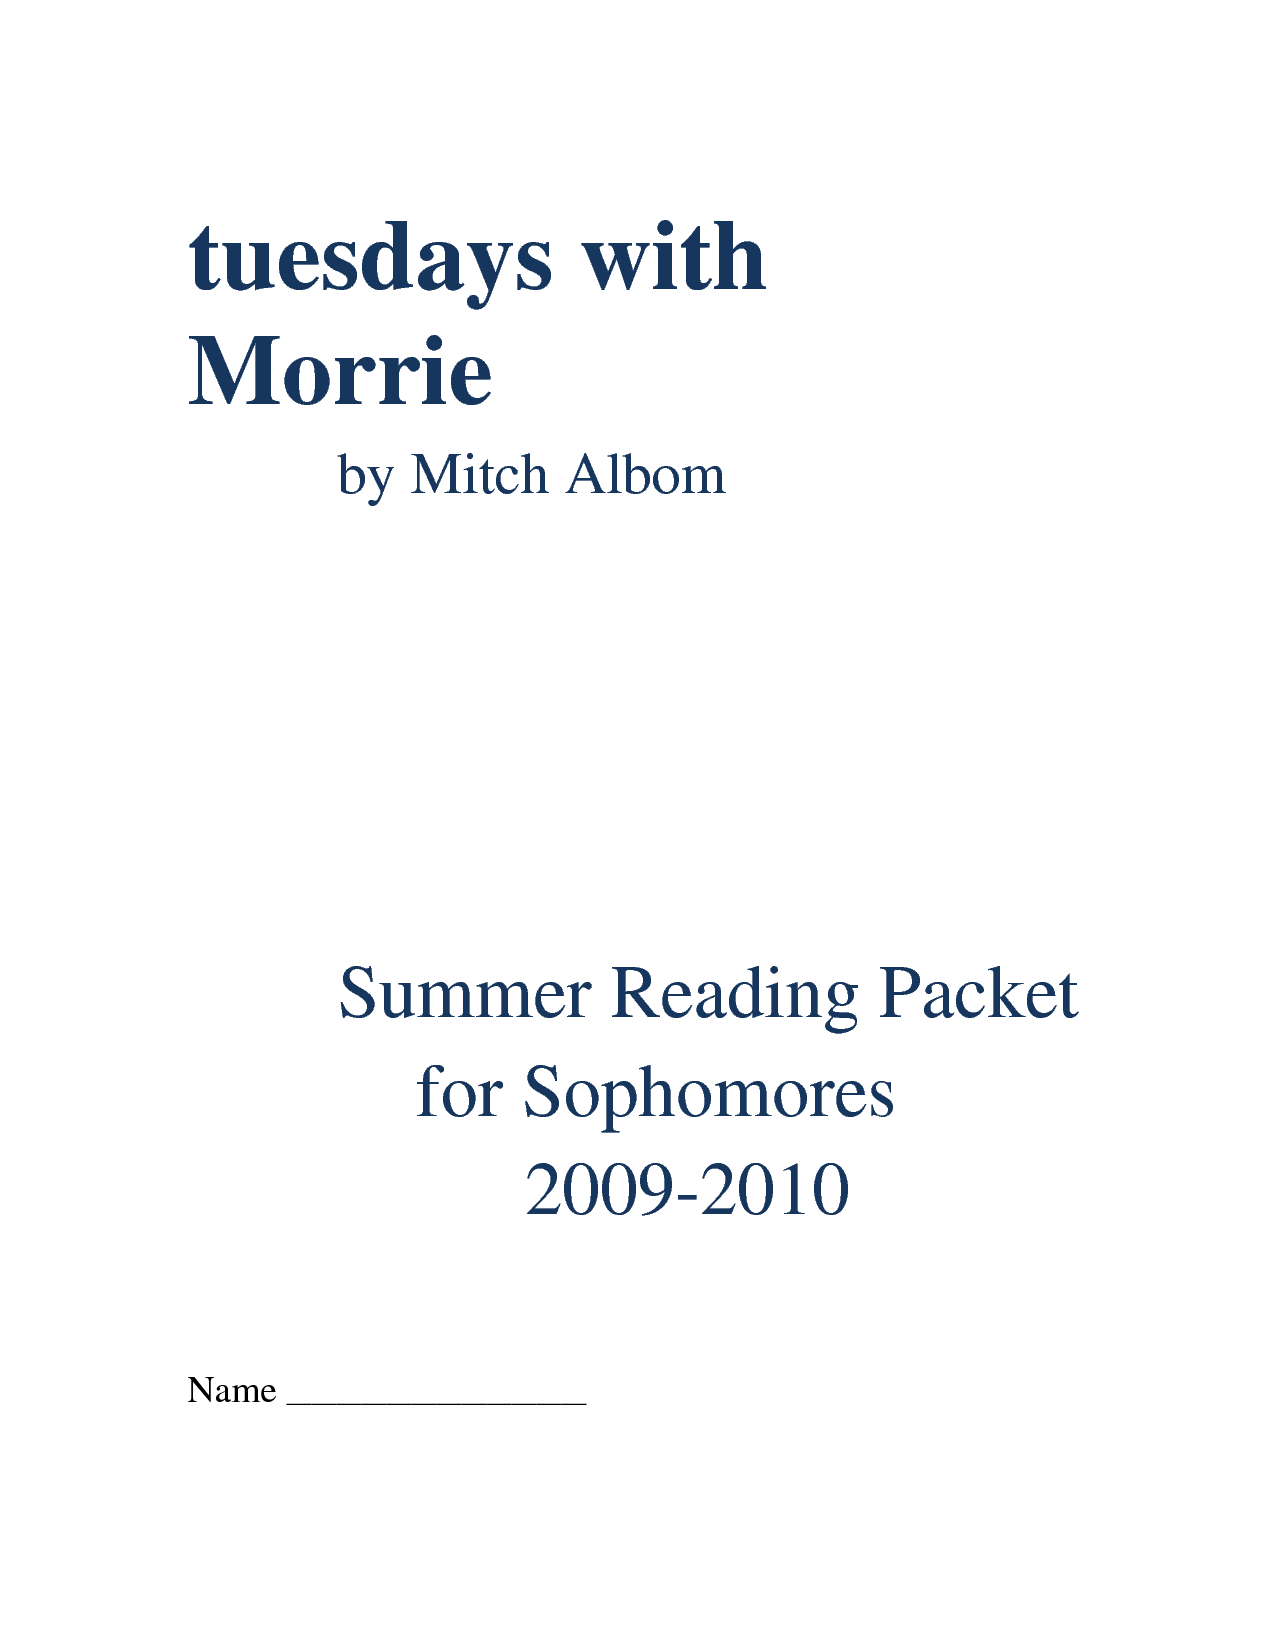 Tuesdays With Morrie Quotes By Chapter. QuotesGram1275 x 1650